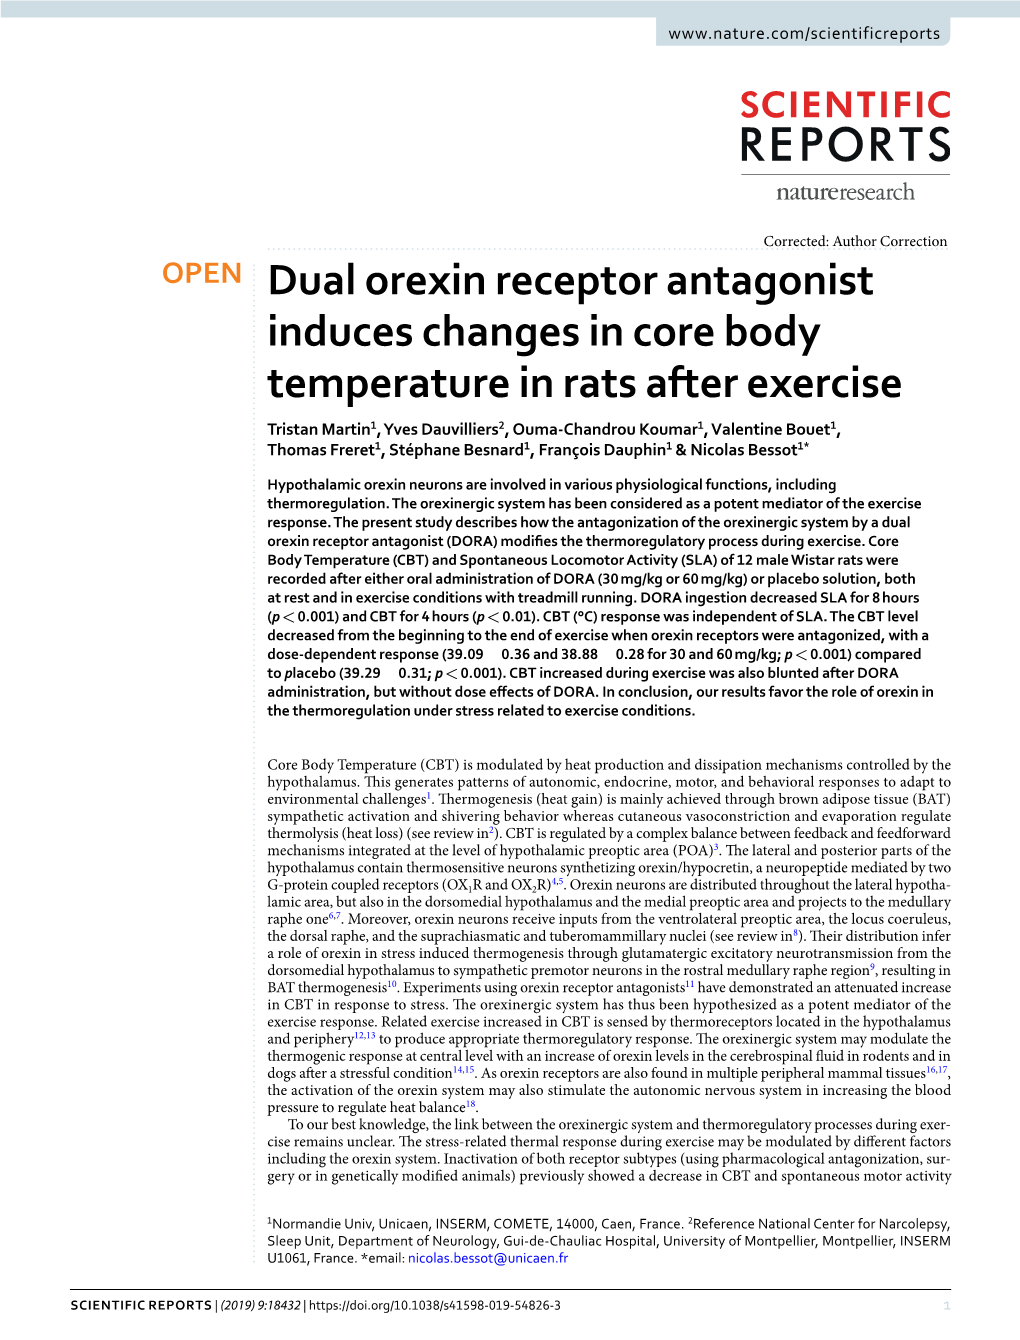 Dual Orexin Receptor Antagonist Induces Changes in Core Body